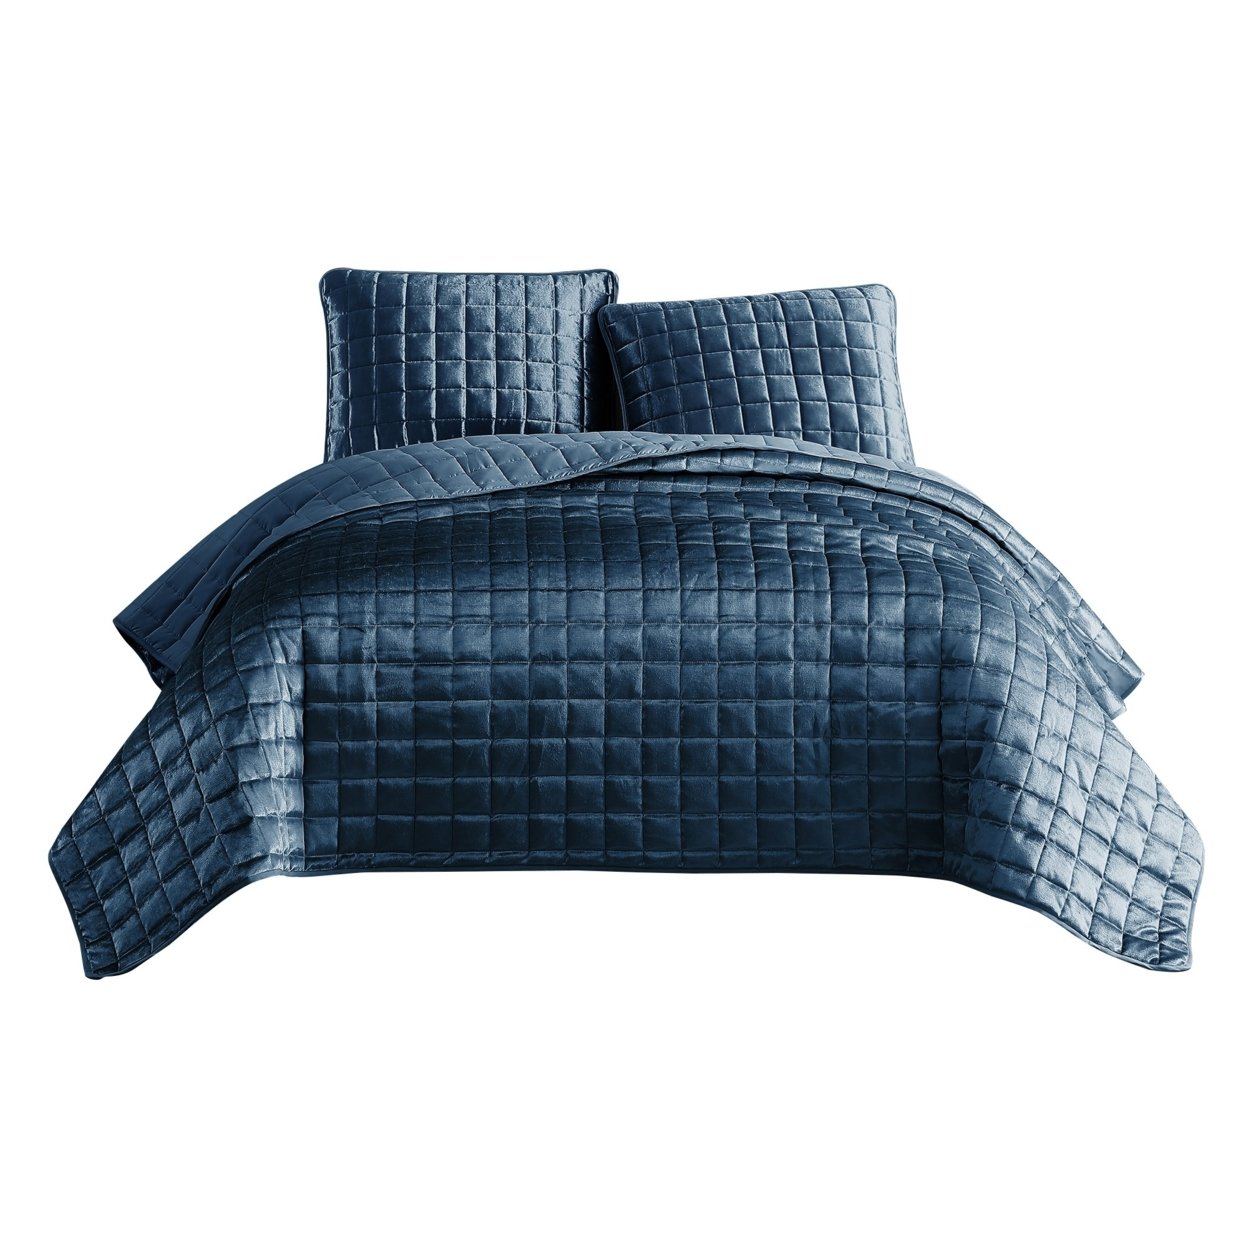 3 Piece Queen Coverlet Set With Stitched Square Pattern, Blue- Saltoro Sherpi